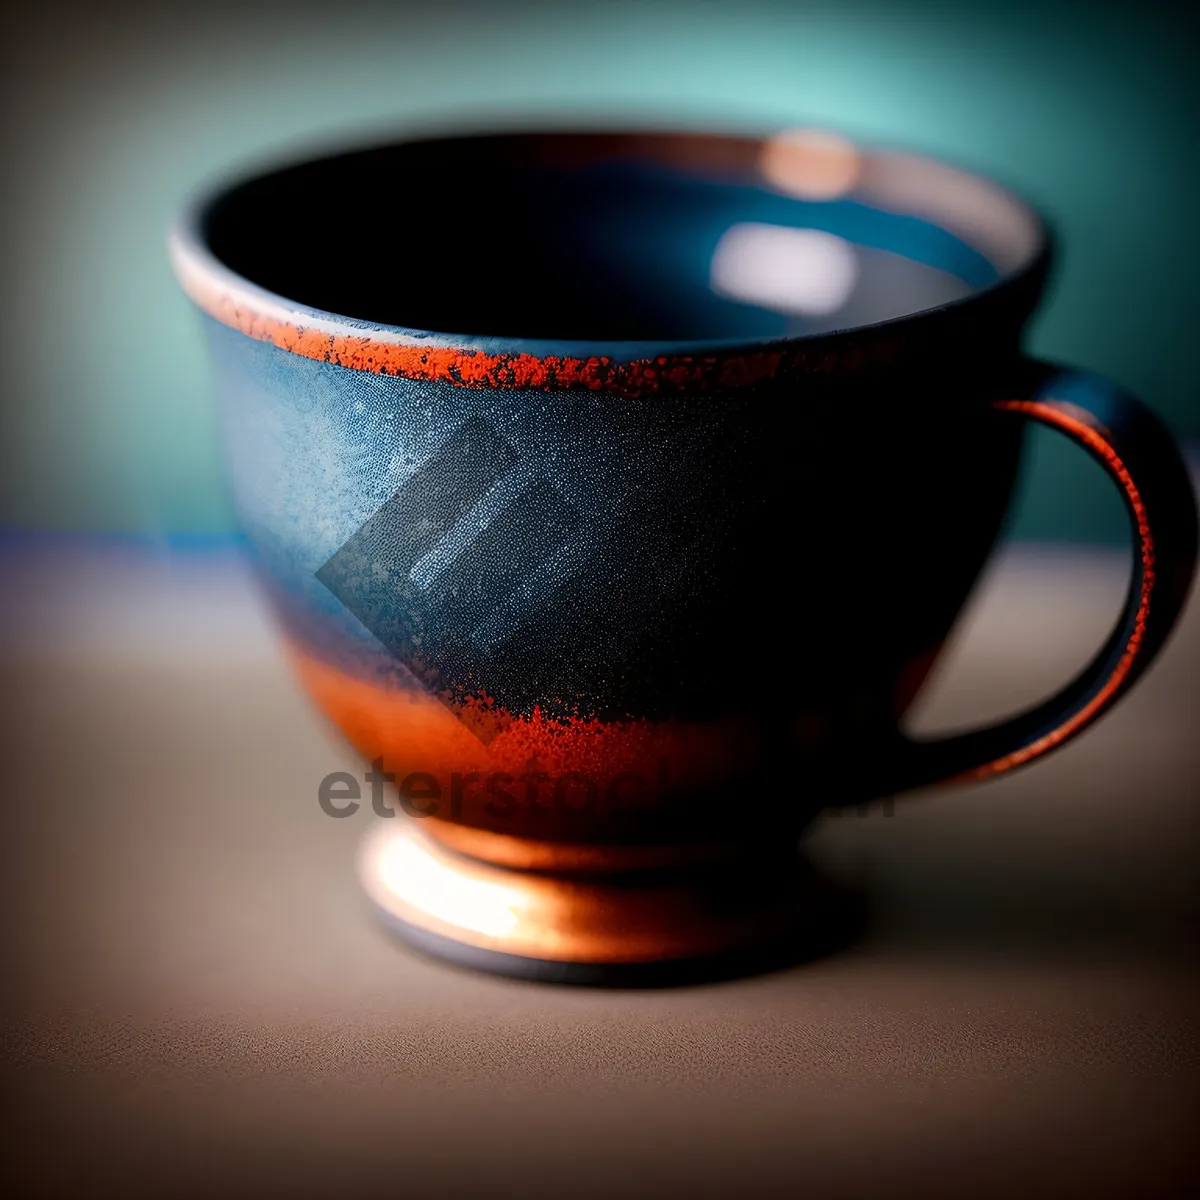 Picture of Steamy Coffee Mug on Breakfast Table